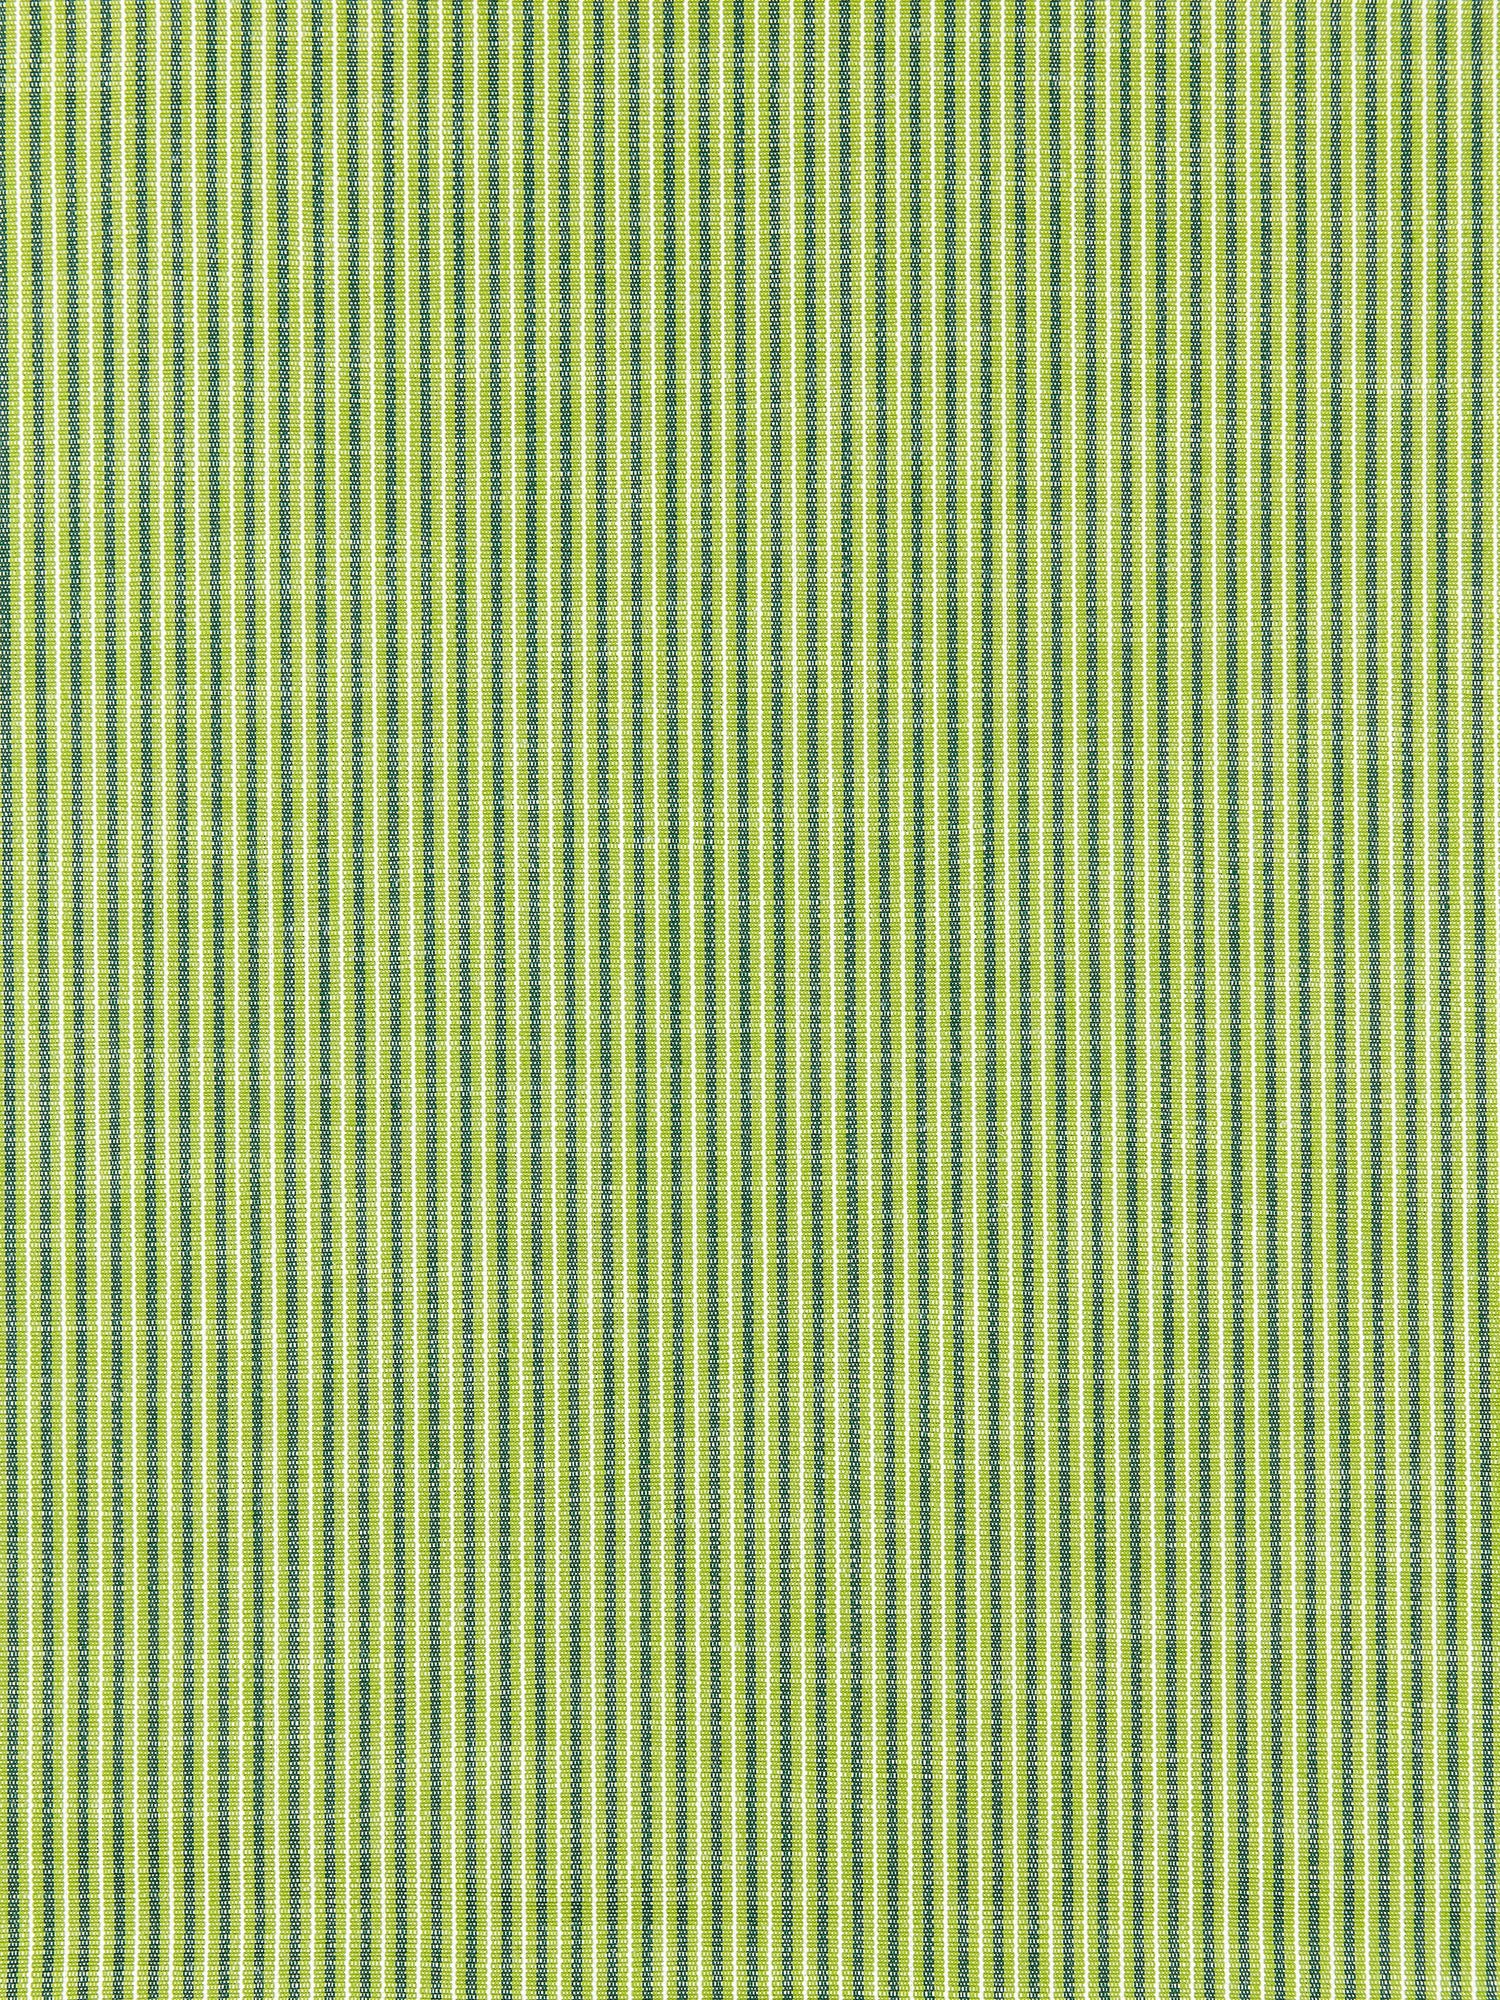 Tisbury Stripe fabric in fern color - pattern number SC 000127109 - by Scalamandre in the Scalamandre Fabrics Book 1 collection